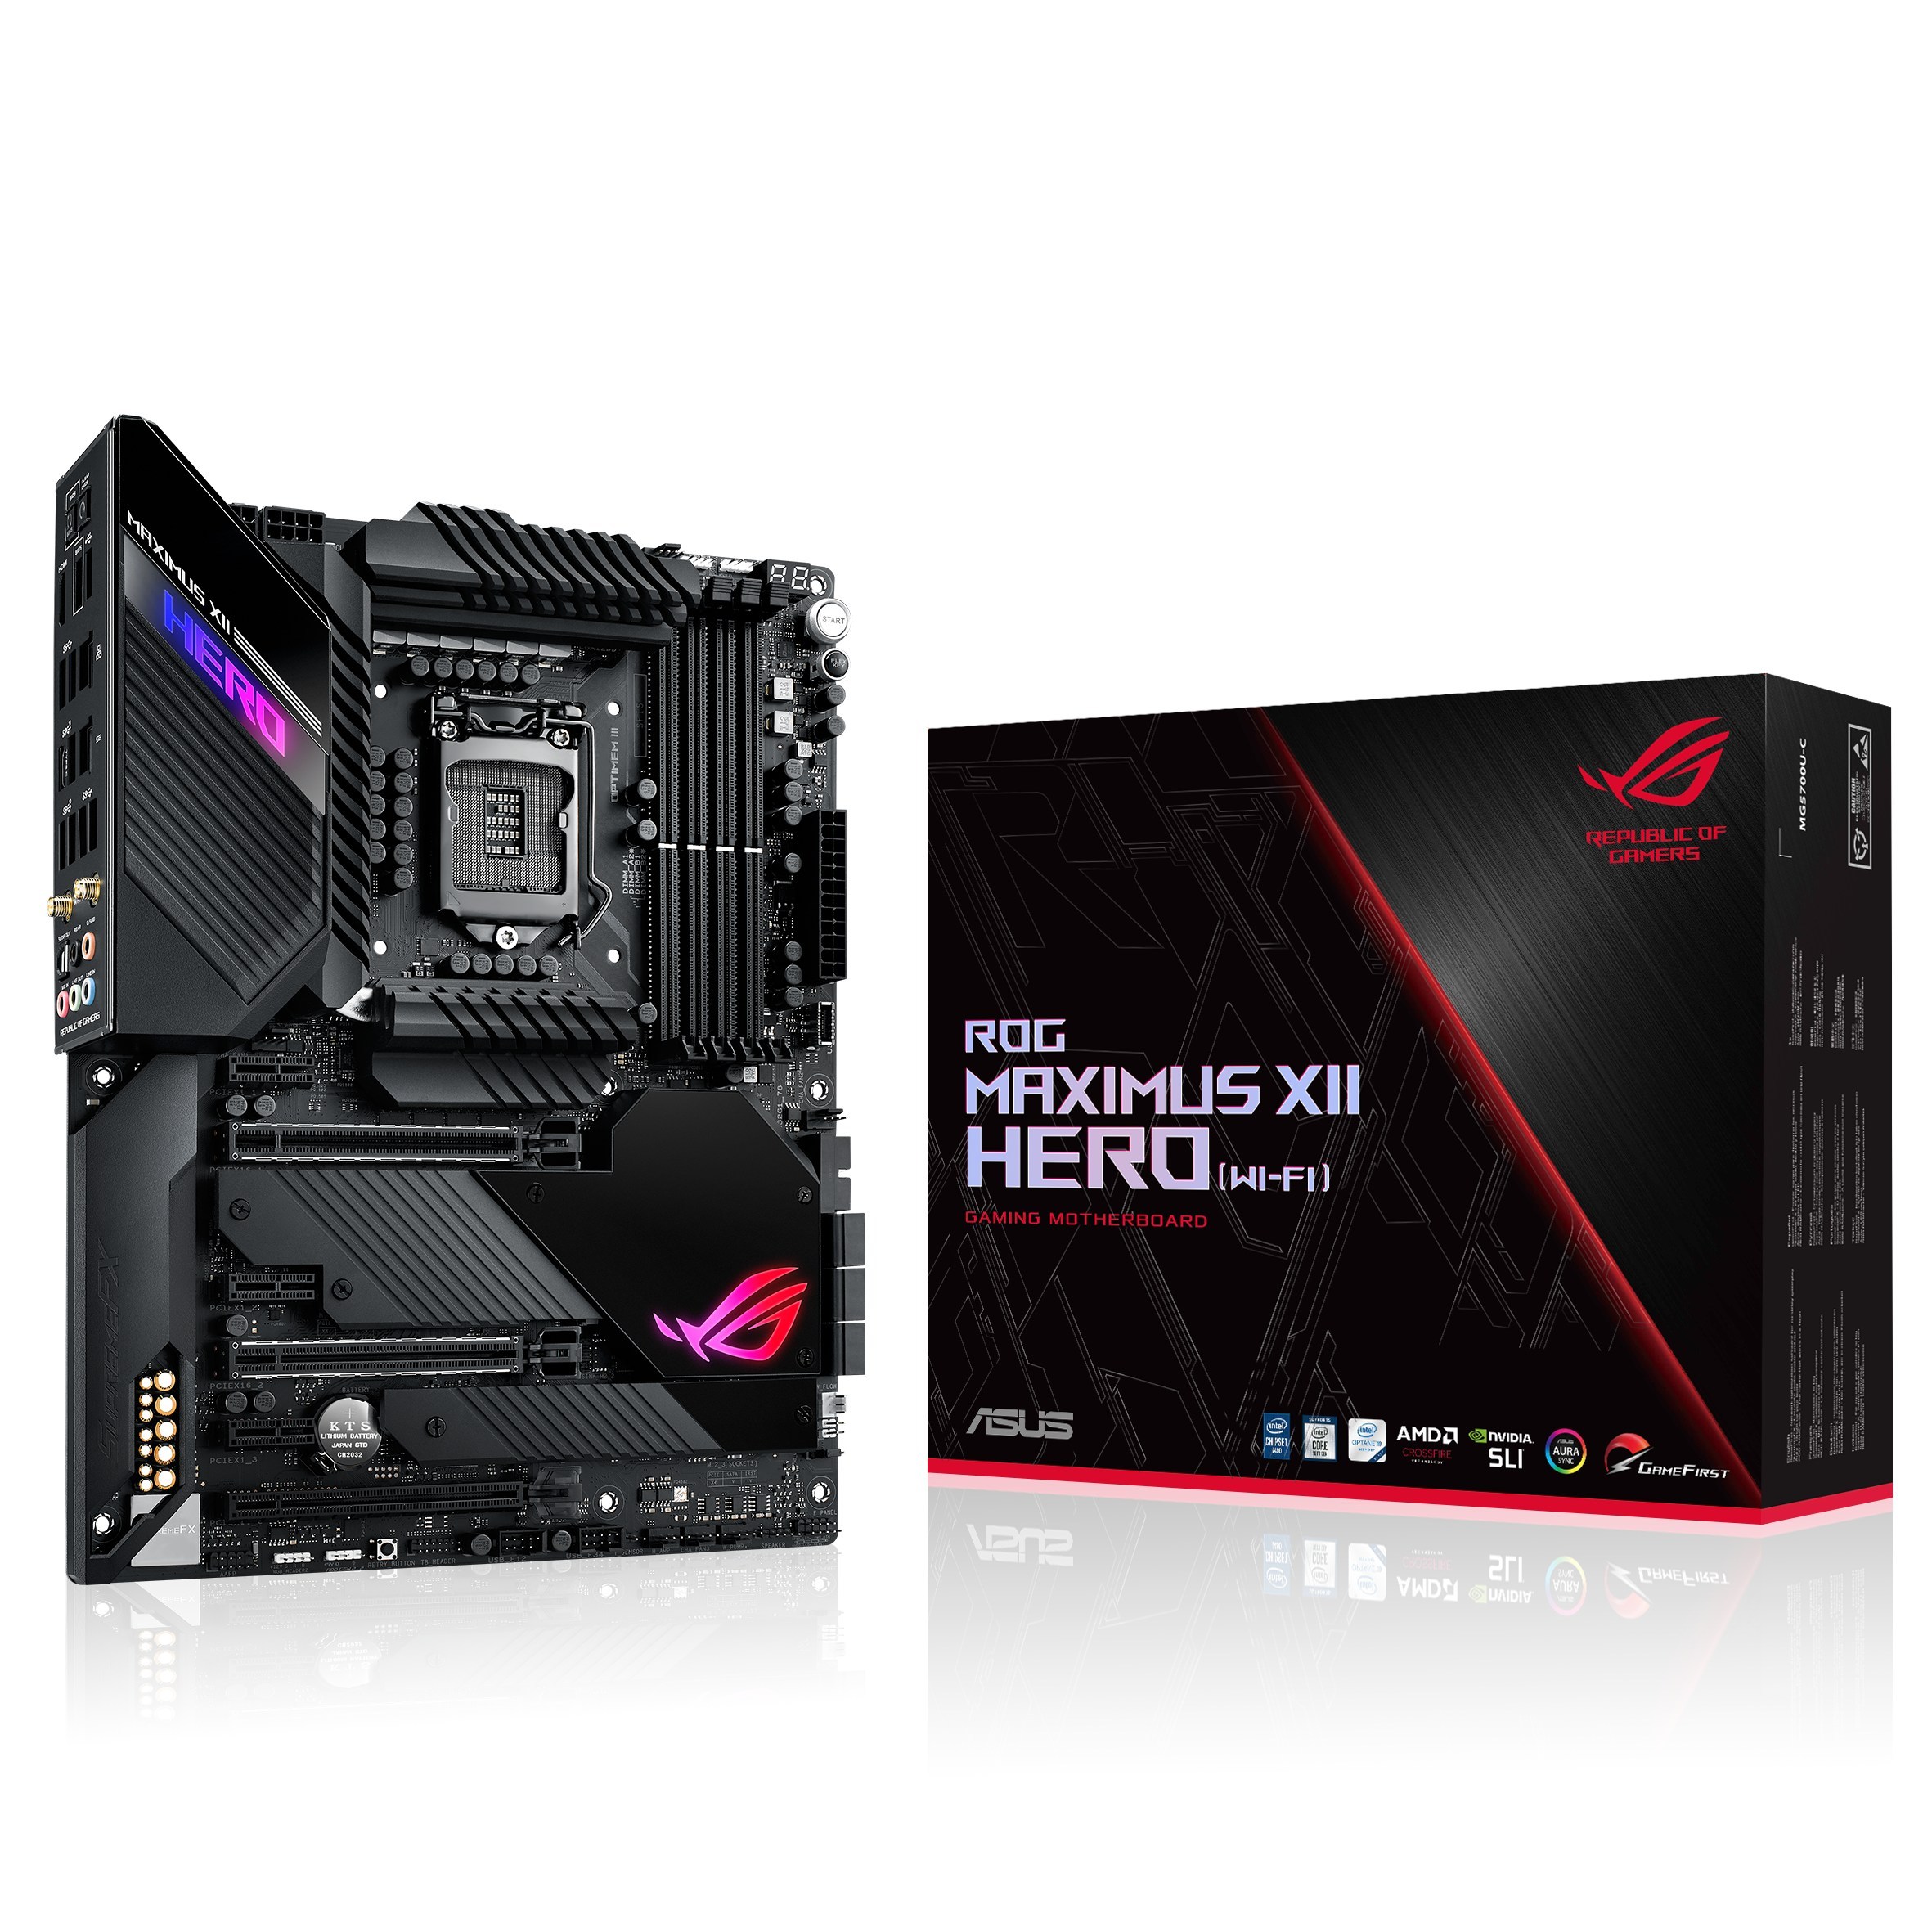 ASUS Introduces Z490 Series Motherboards to Maximize the Power of 10th Gen Intel® Core™ Processors